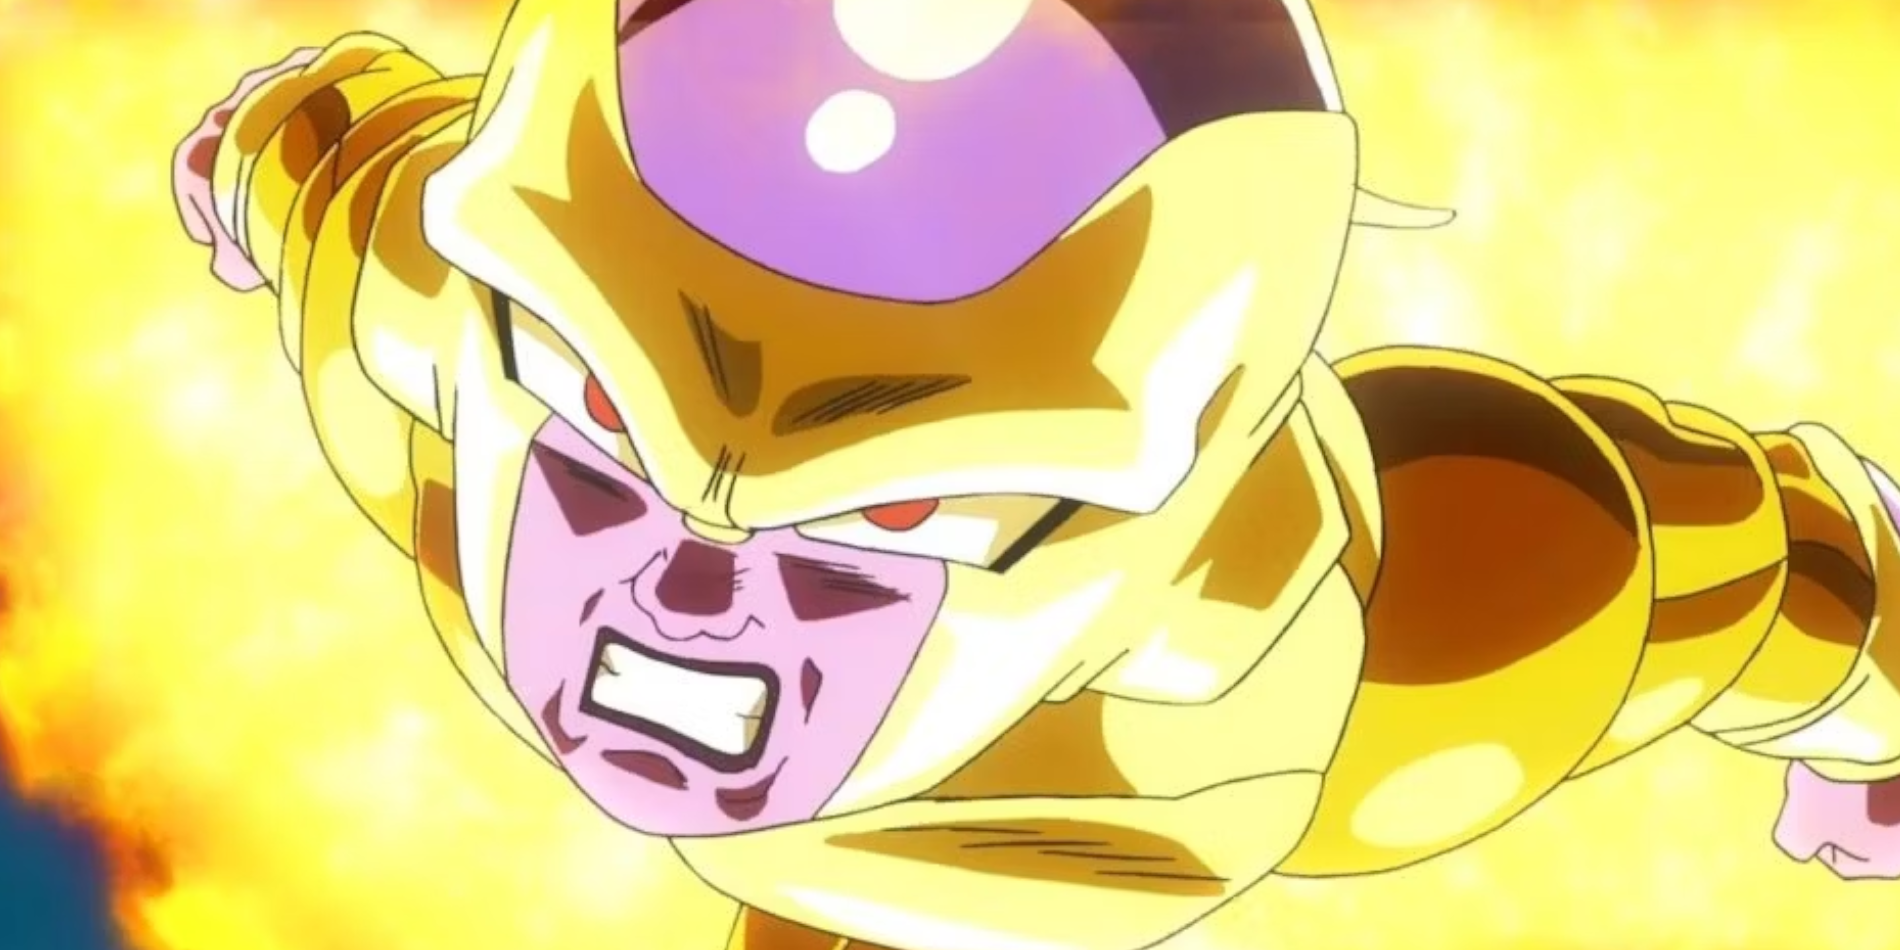 Frieza in his Rage Golden Form 1